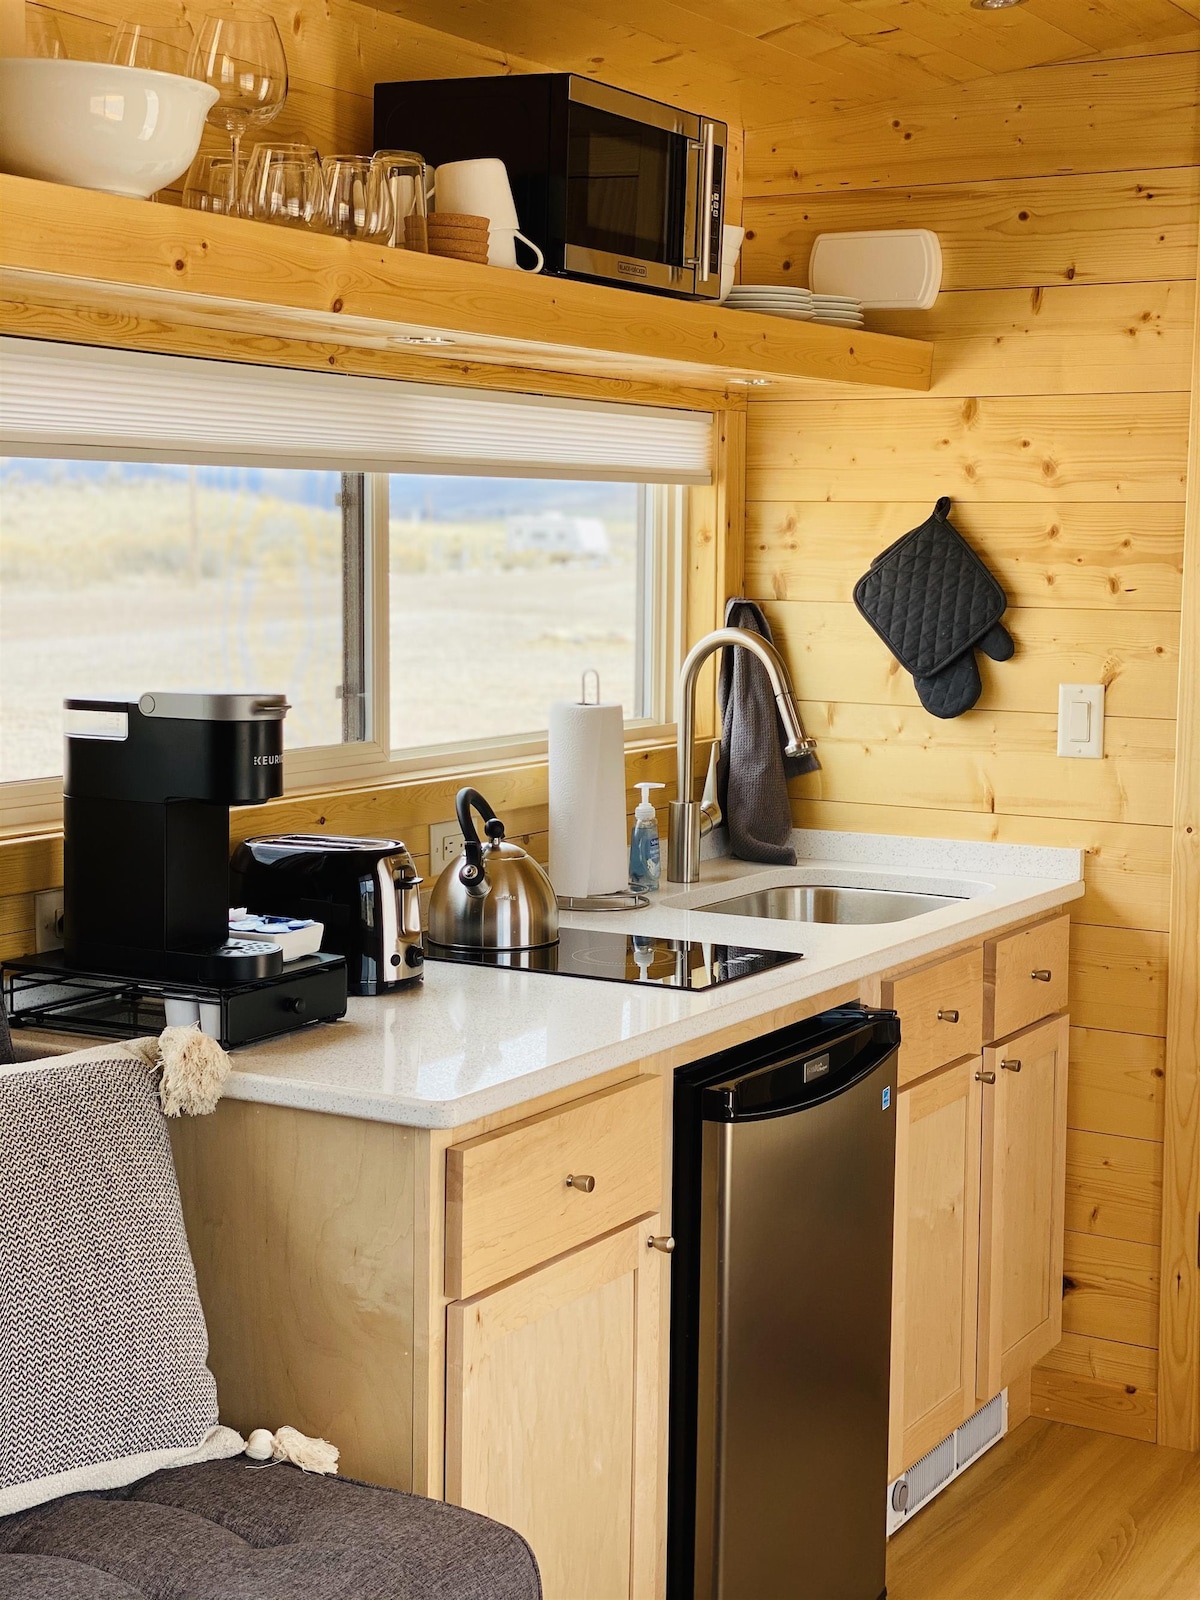 Pinyon Pines Tiny Home at Trail and Hitch